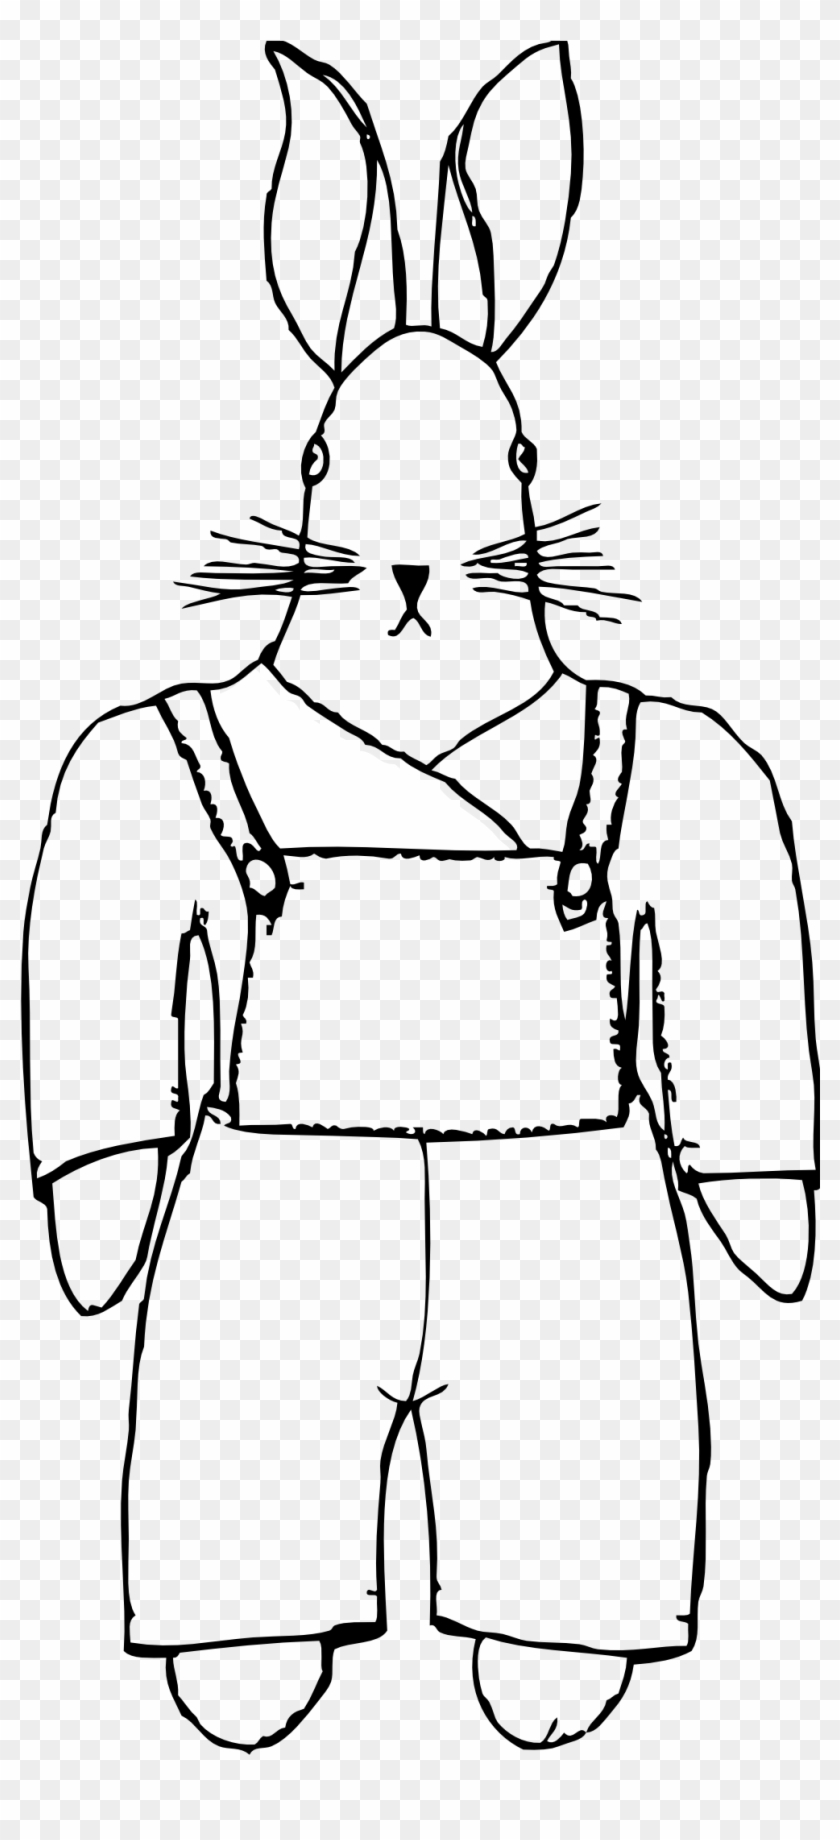 Bunny In Overalls Front View Black White Line Art 999px - Cartoon Dungarees #1609643